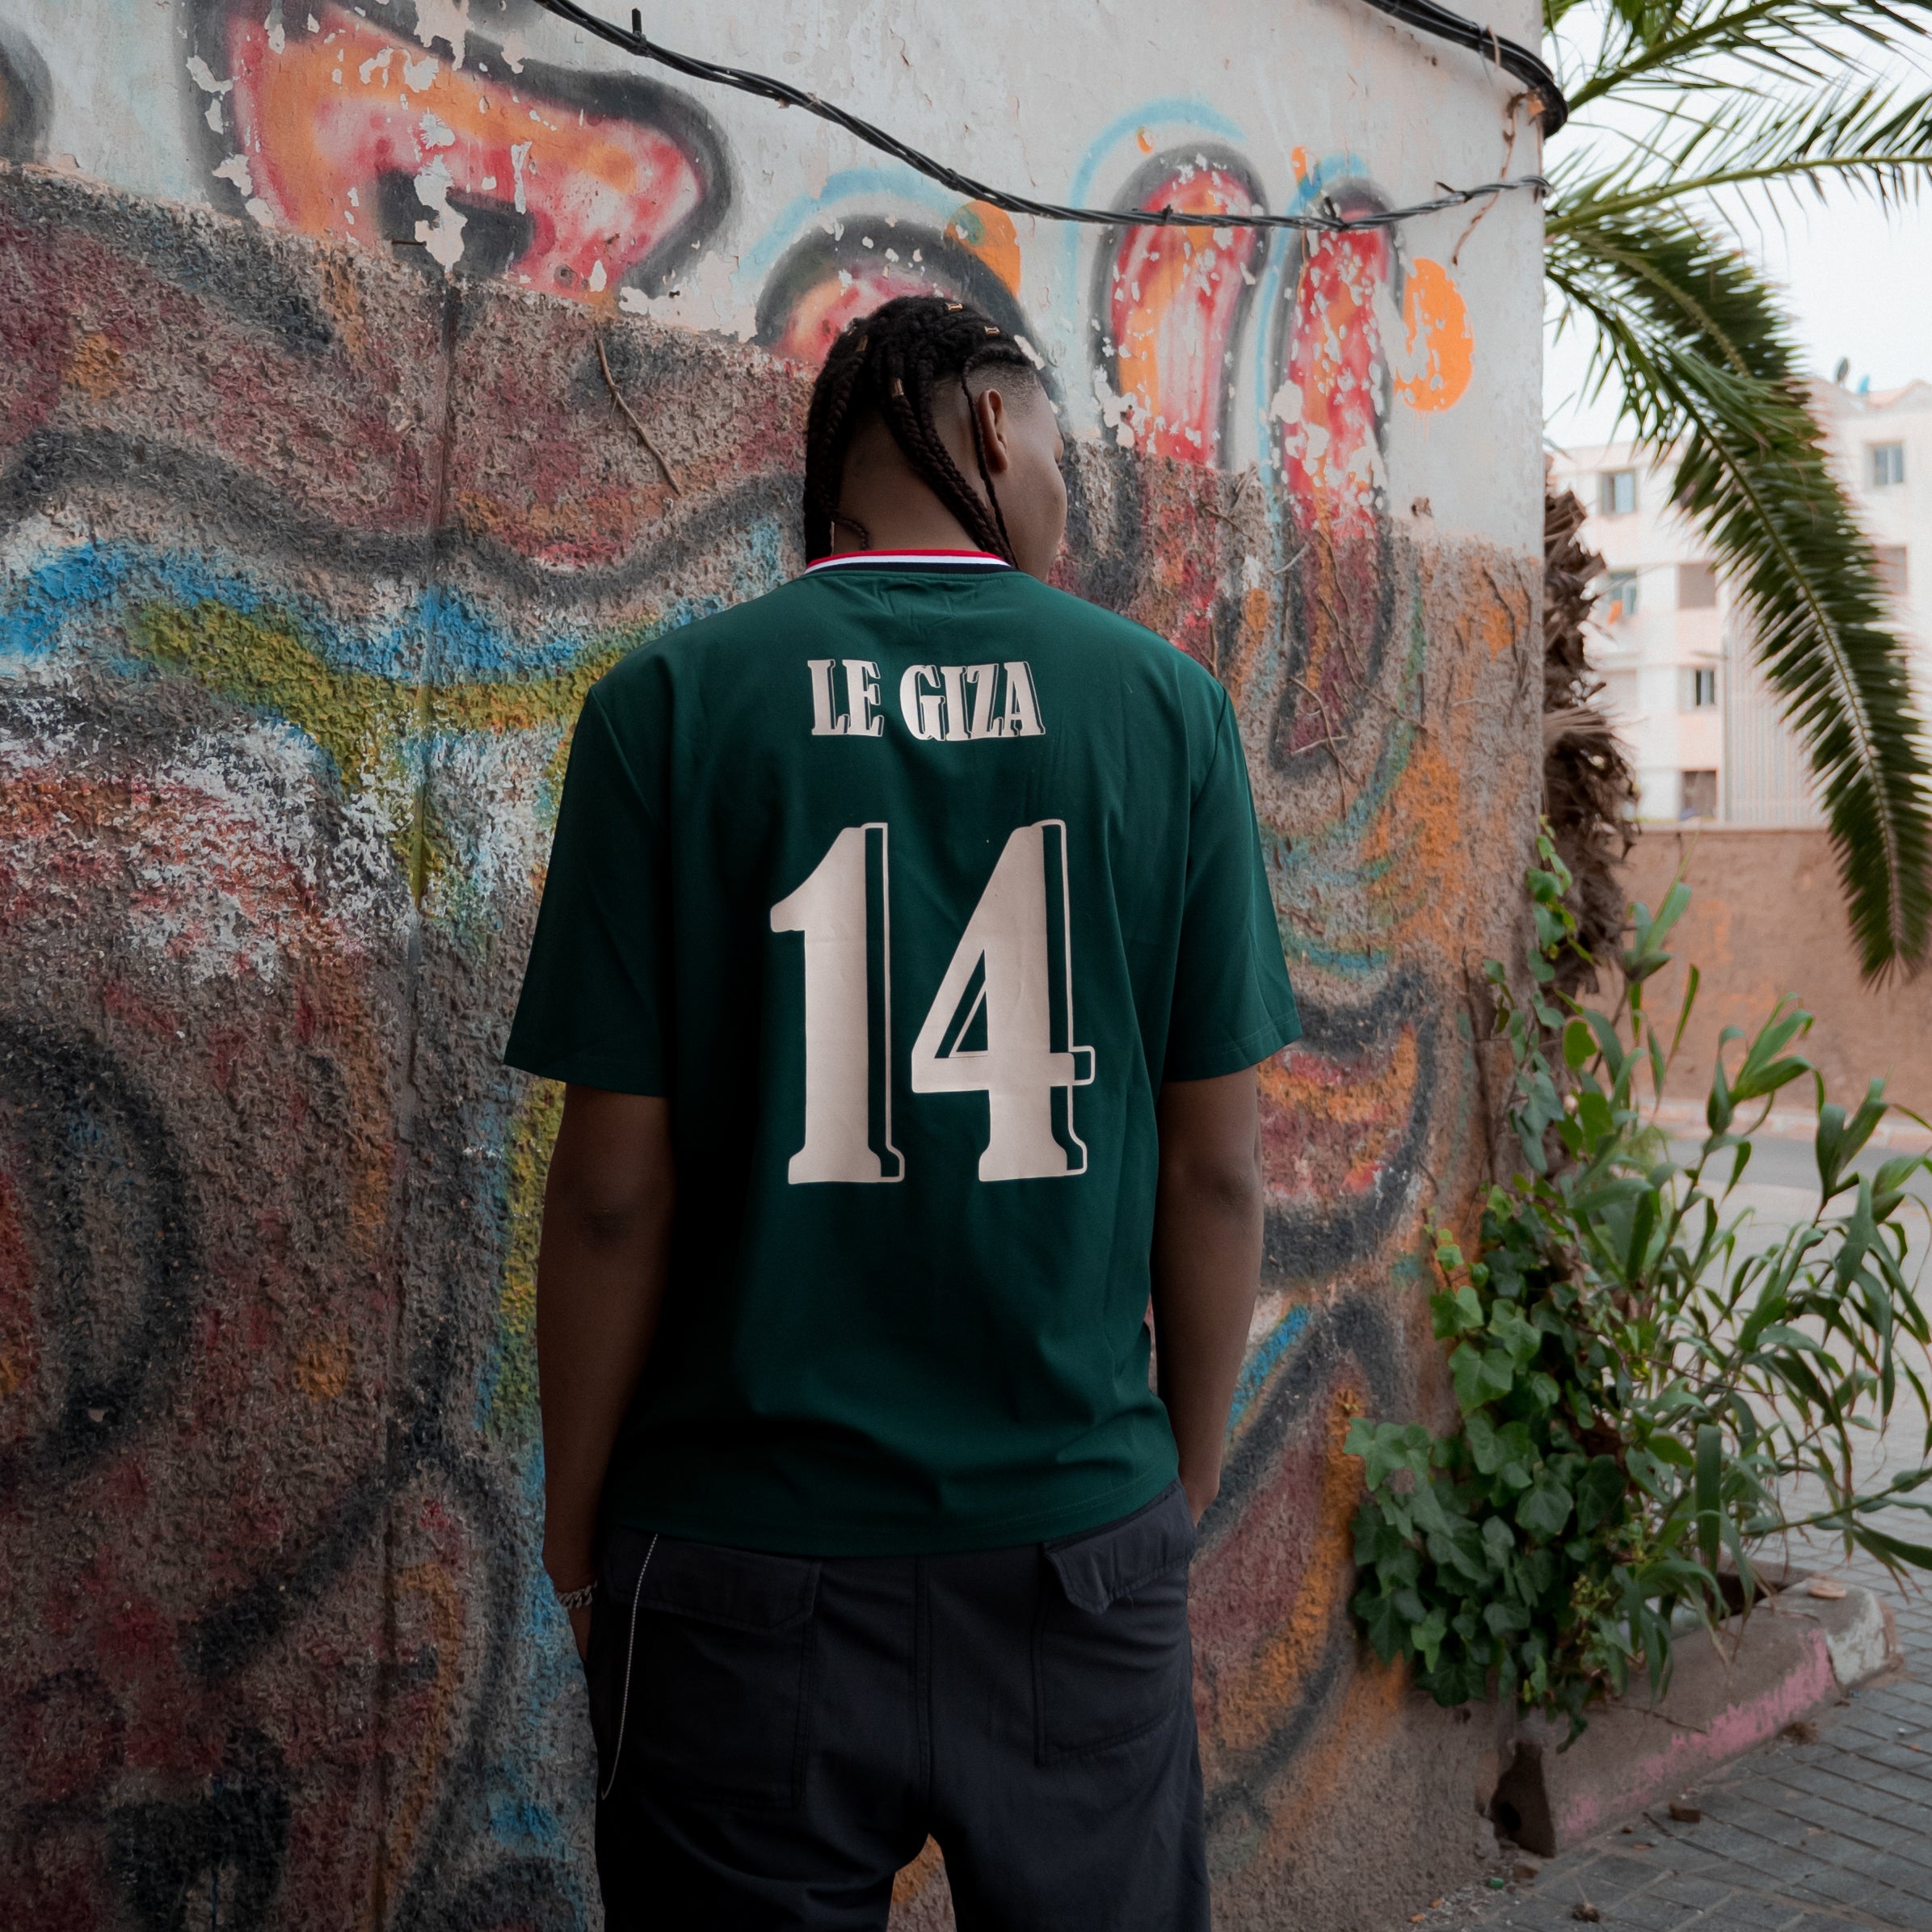 Abdul, 190cm tall, wearing a size Large of the Dark Green Le Giza Football Jersey.